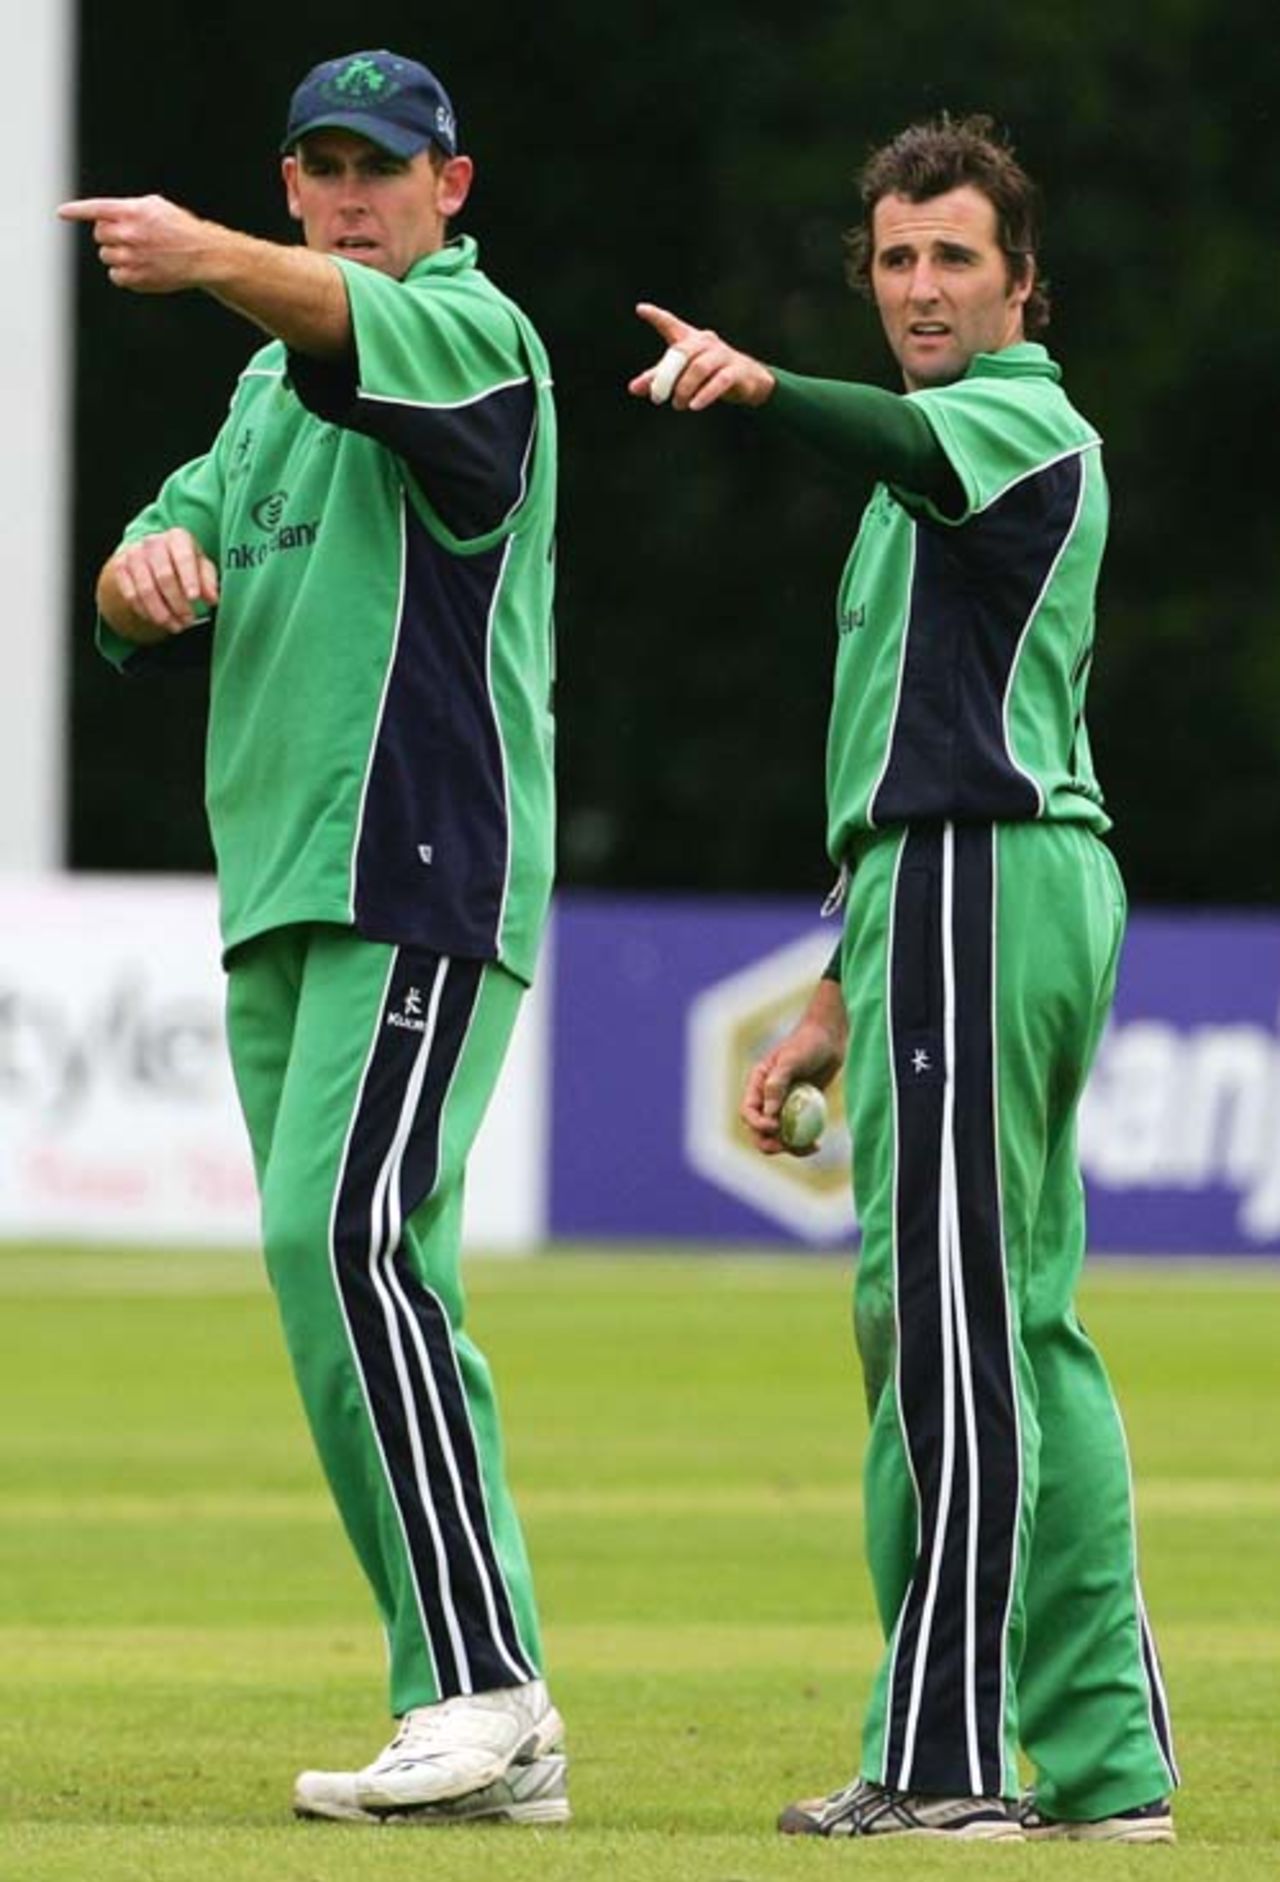 Trent Johnston adjusts the field along with Kyle McCallan, Ireland v South Africa, Belfast, One-off ODI, June 24, 2007